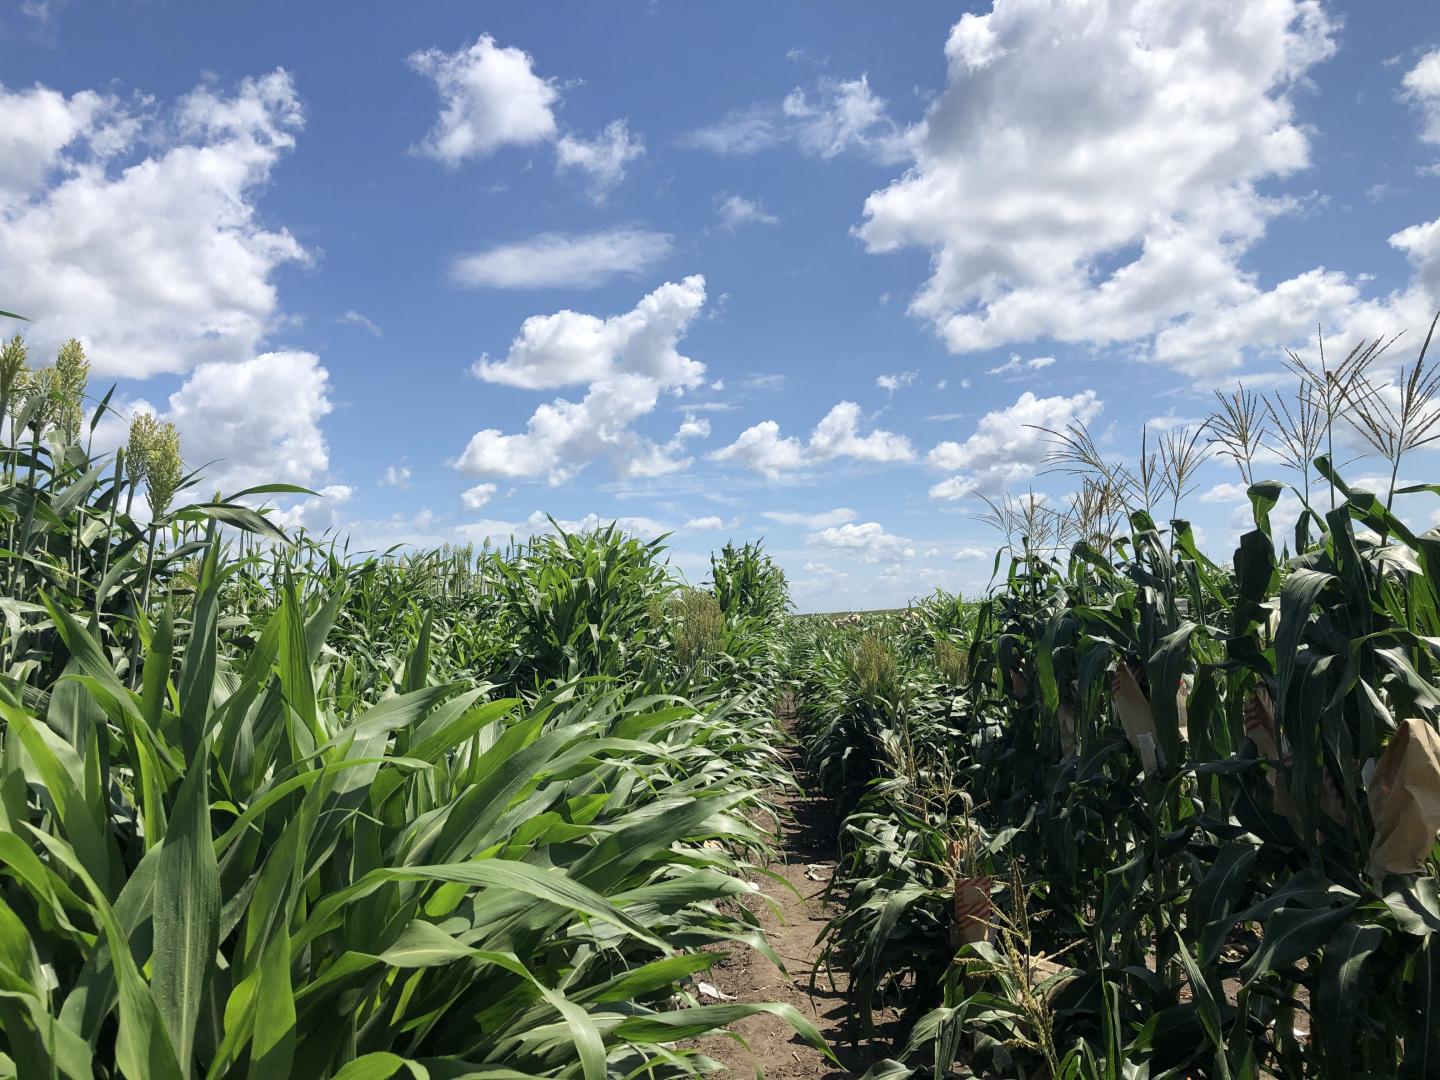 Iowa State University researchers use advanced data analytics to help scientists understand how environmental conditions interact with genomics in corn, pictured here, as well as other crops. Source: Jianming Yu